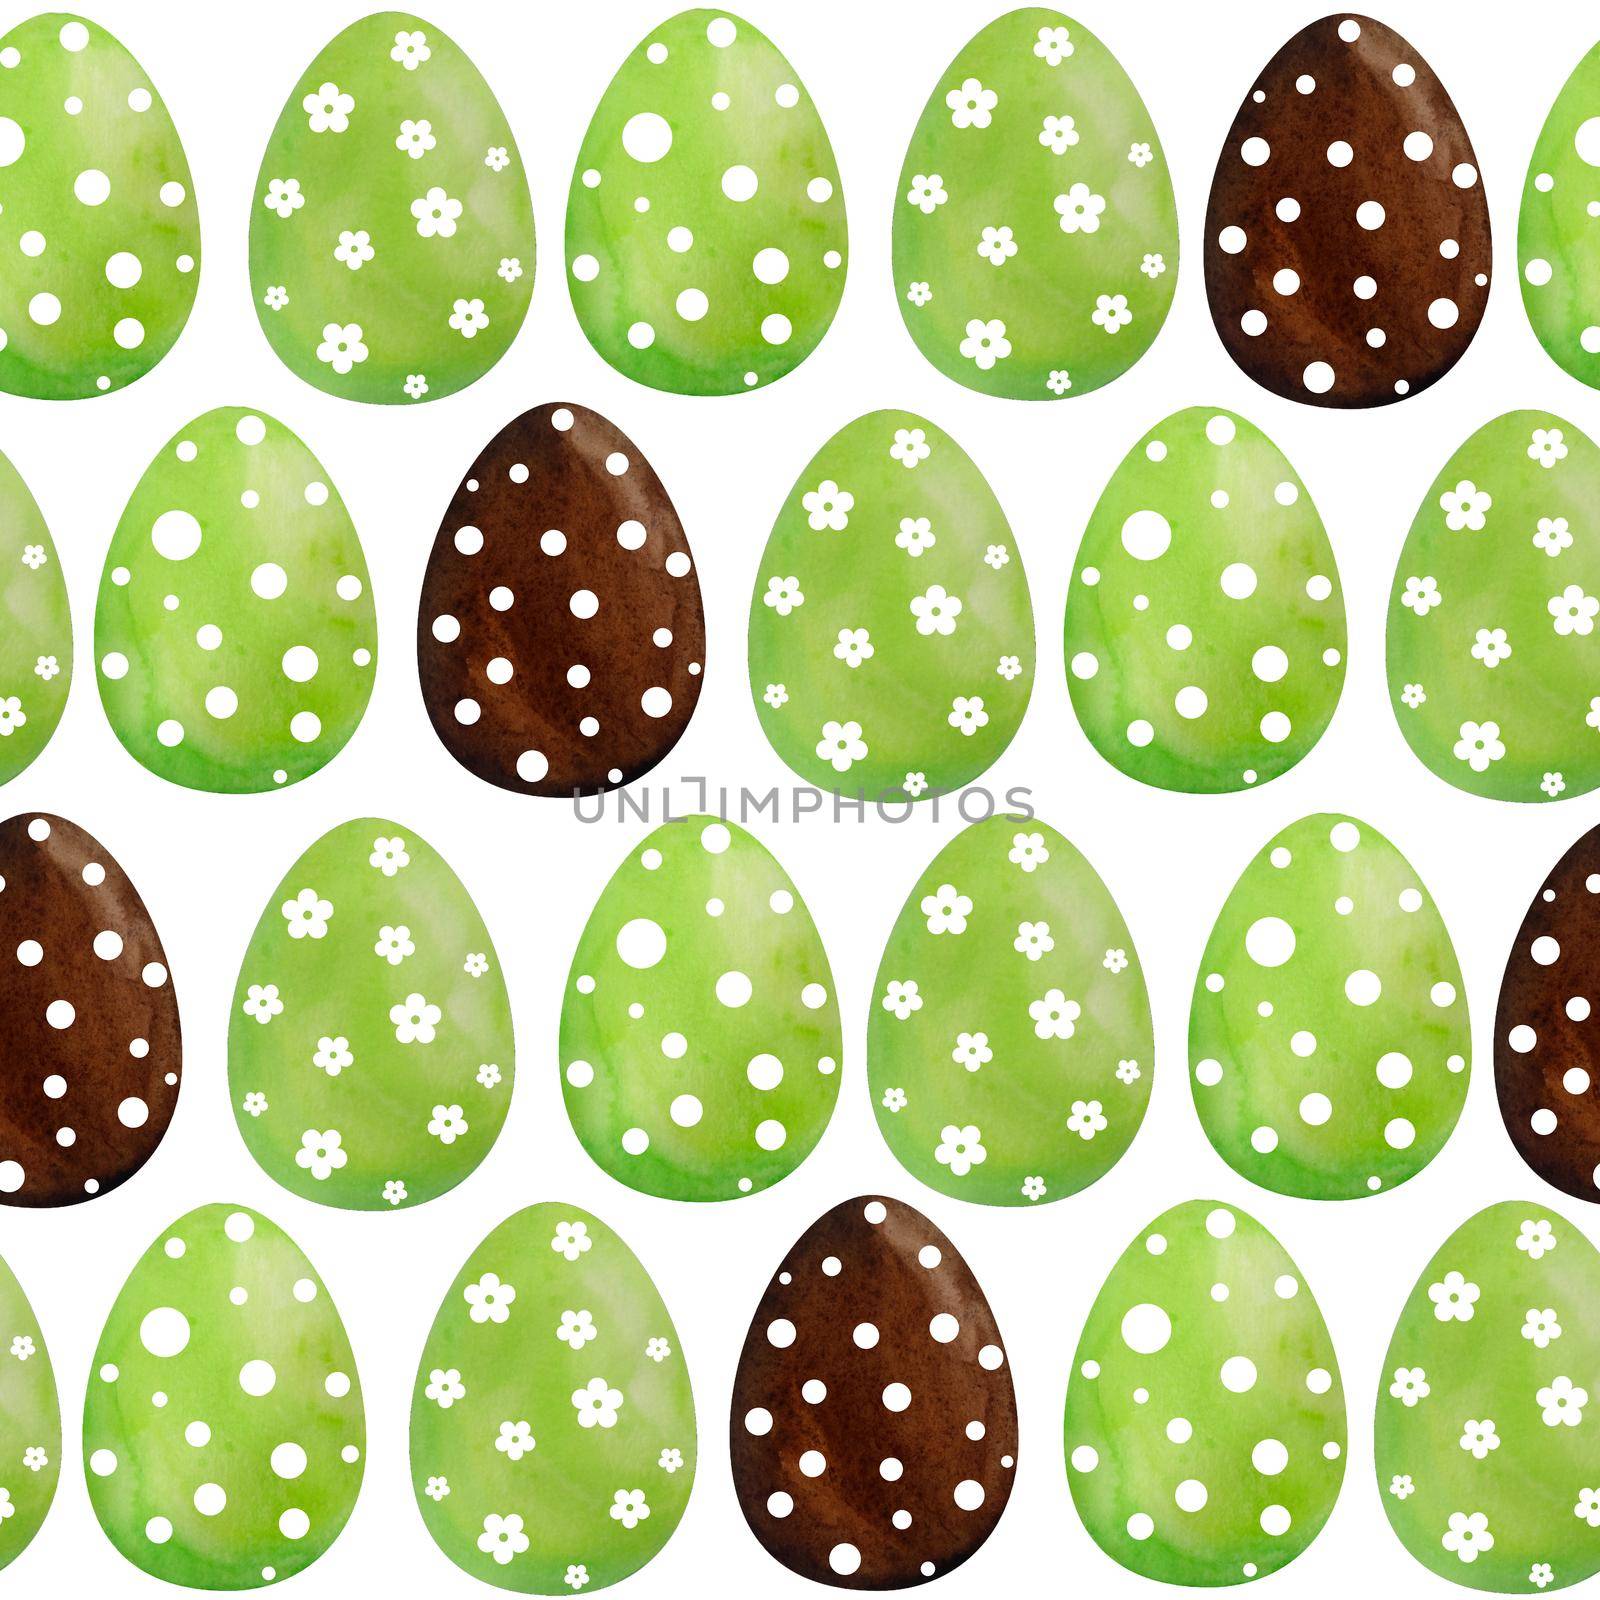 Seamless watercolor hand drawn pattern happy easter eggs of green brown chocolate color with polka dot ornament. Colored religious Christian symbols for cards invitation design celebration decoration. by Lagmar